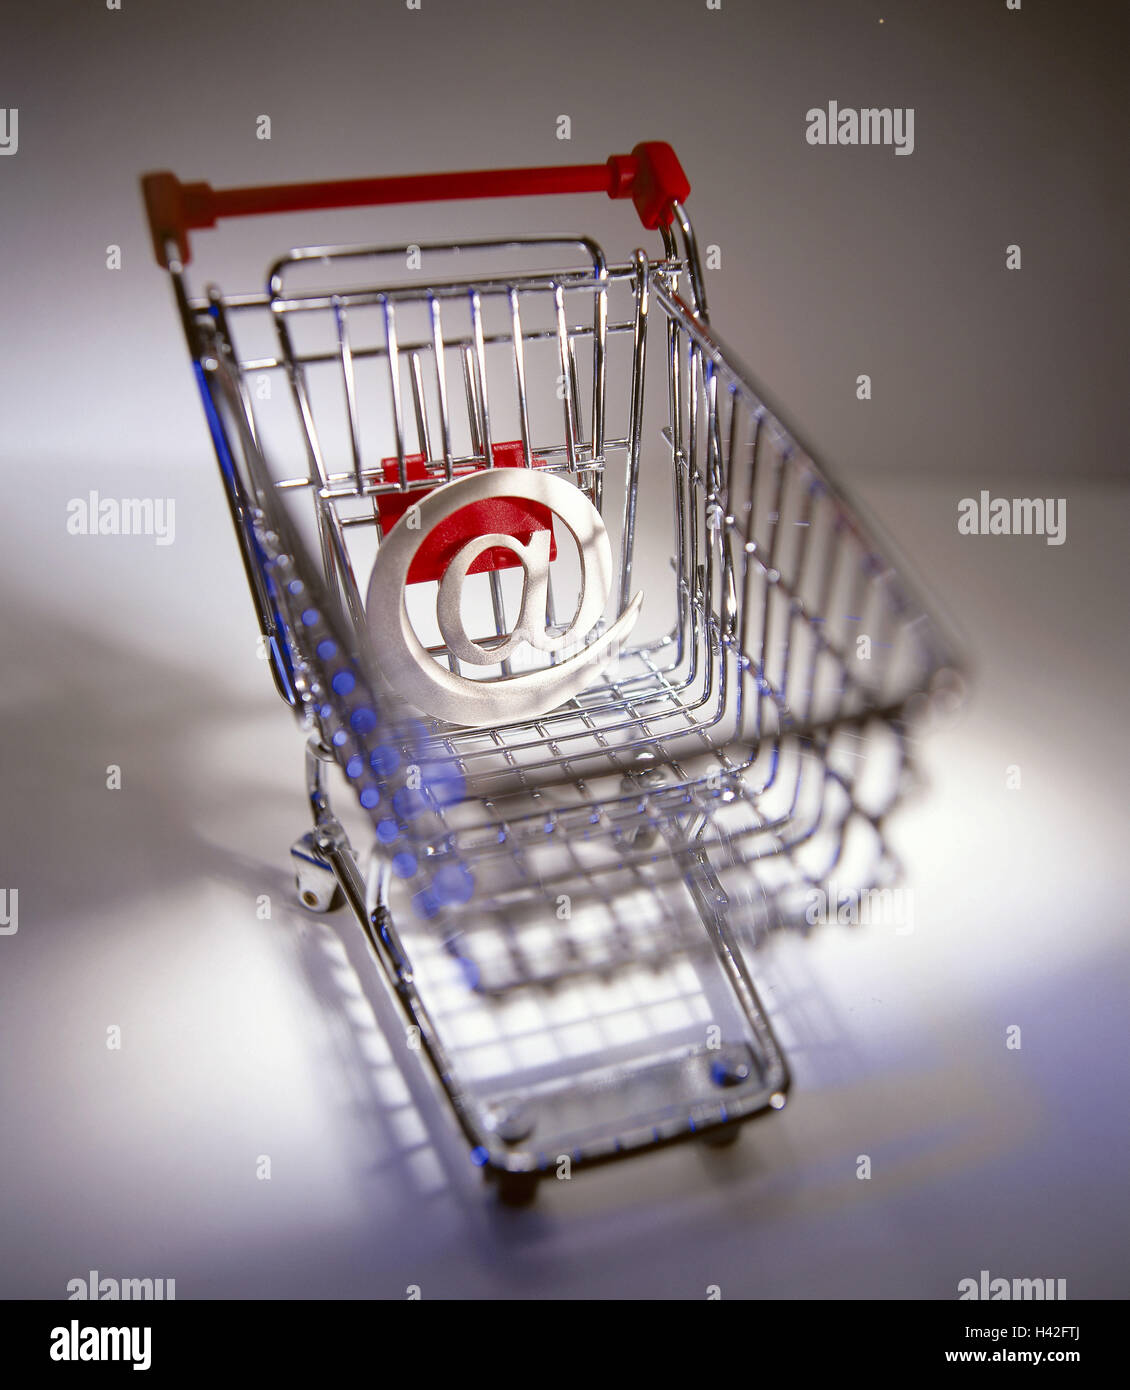 Shopping carts, at-sign, icon, Internet shopping make purchases, shops, shopping, purchasing, technology, trade, digitally, e-commerce, Internet, teleshopping, teleshopping, Internet shopping, Internet trade, online, miniature shopping carts, At, At icon, Stock Photo